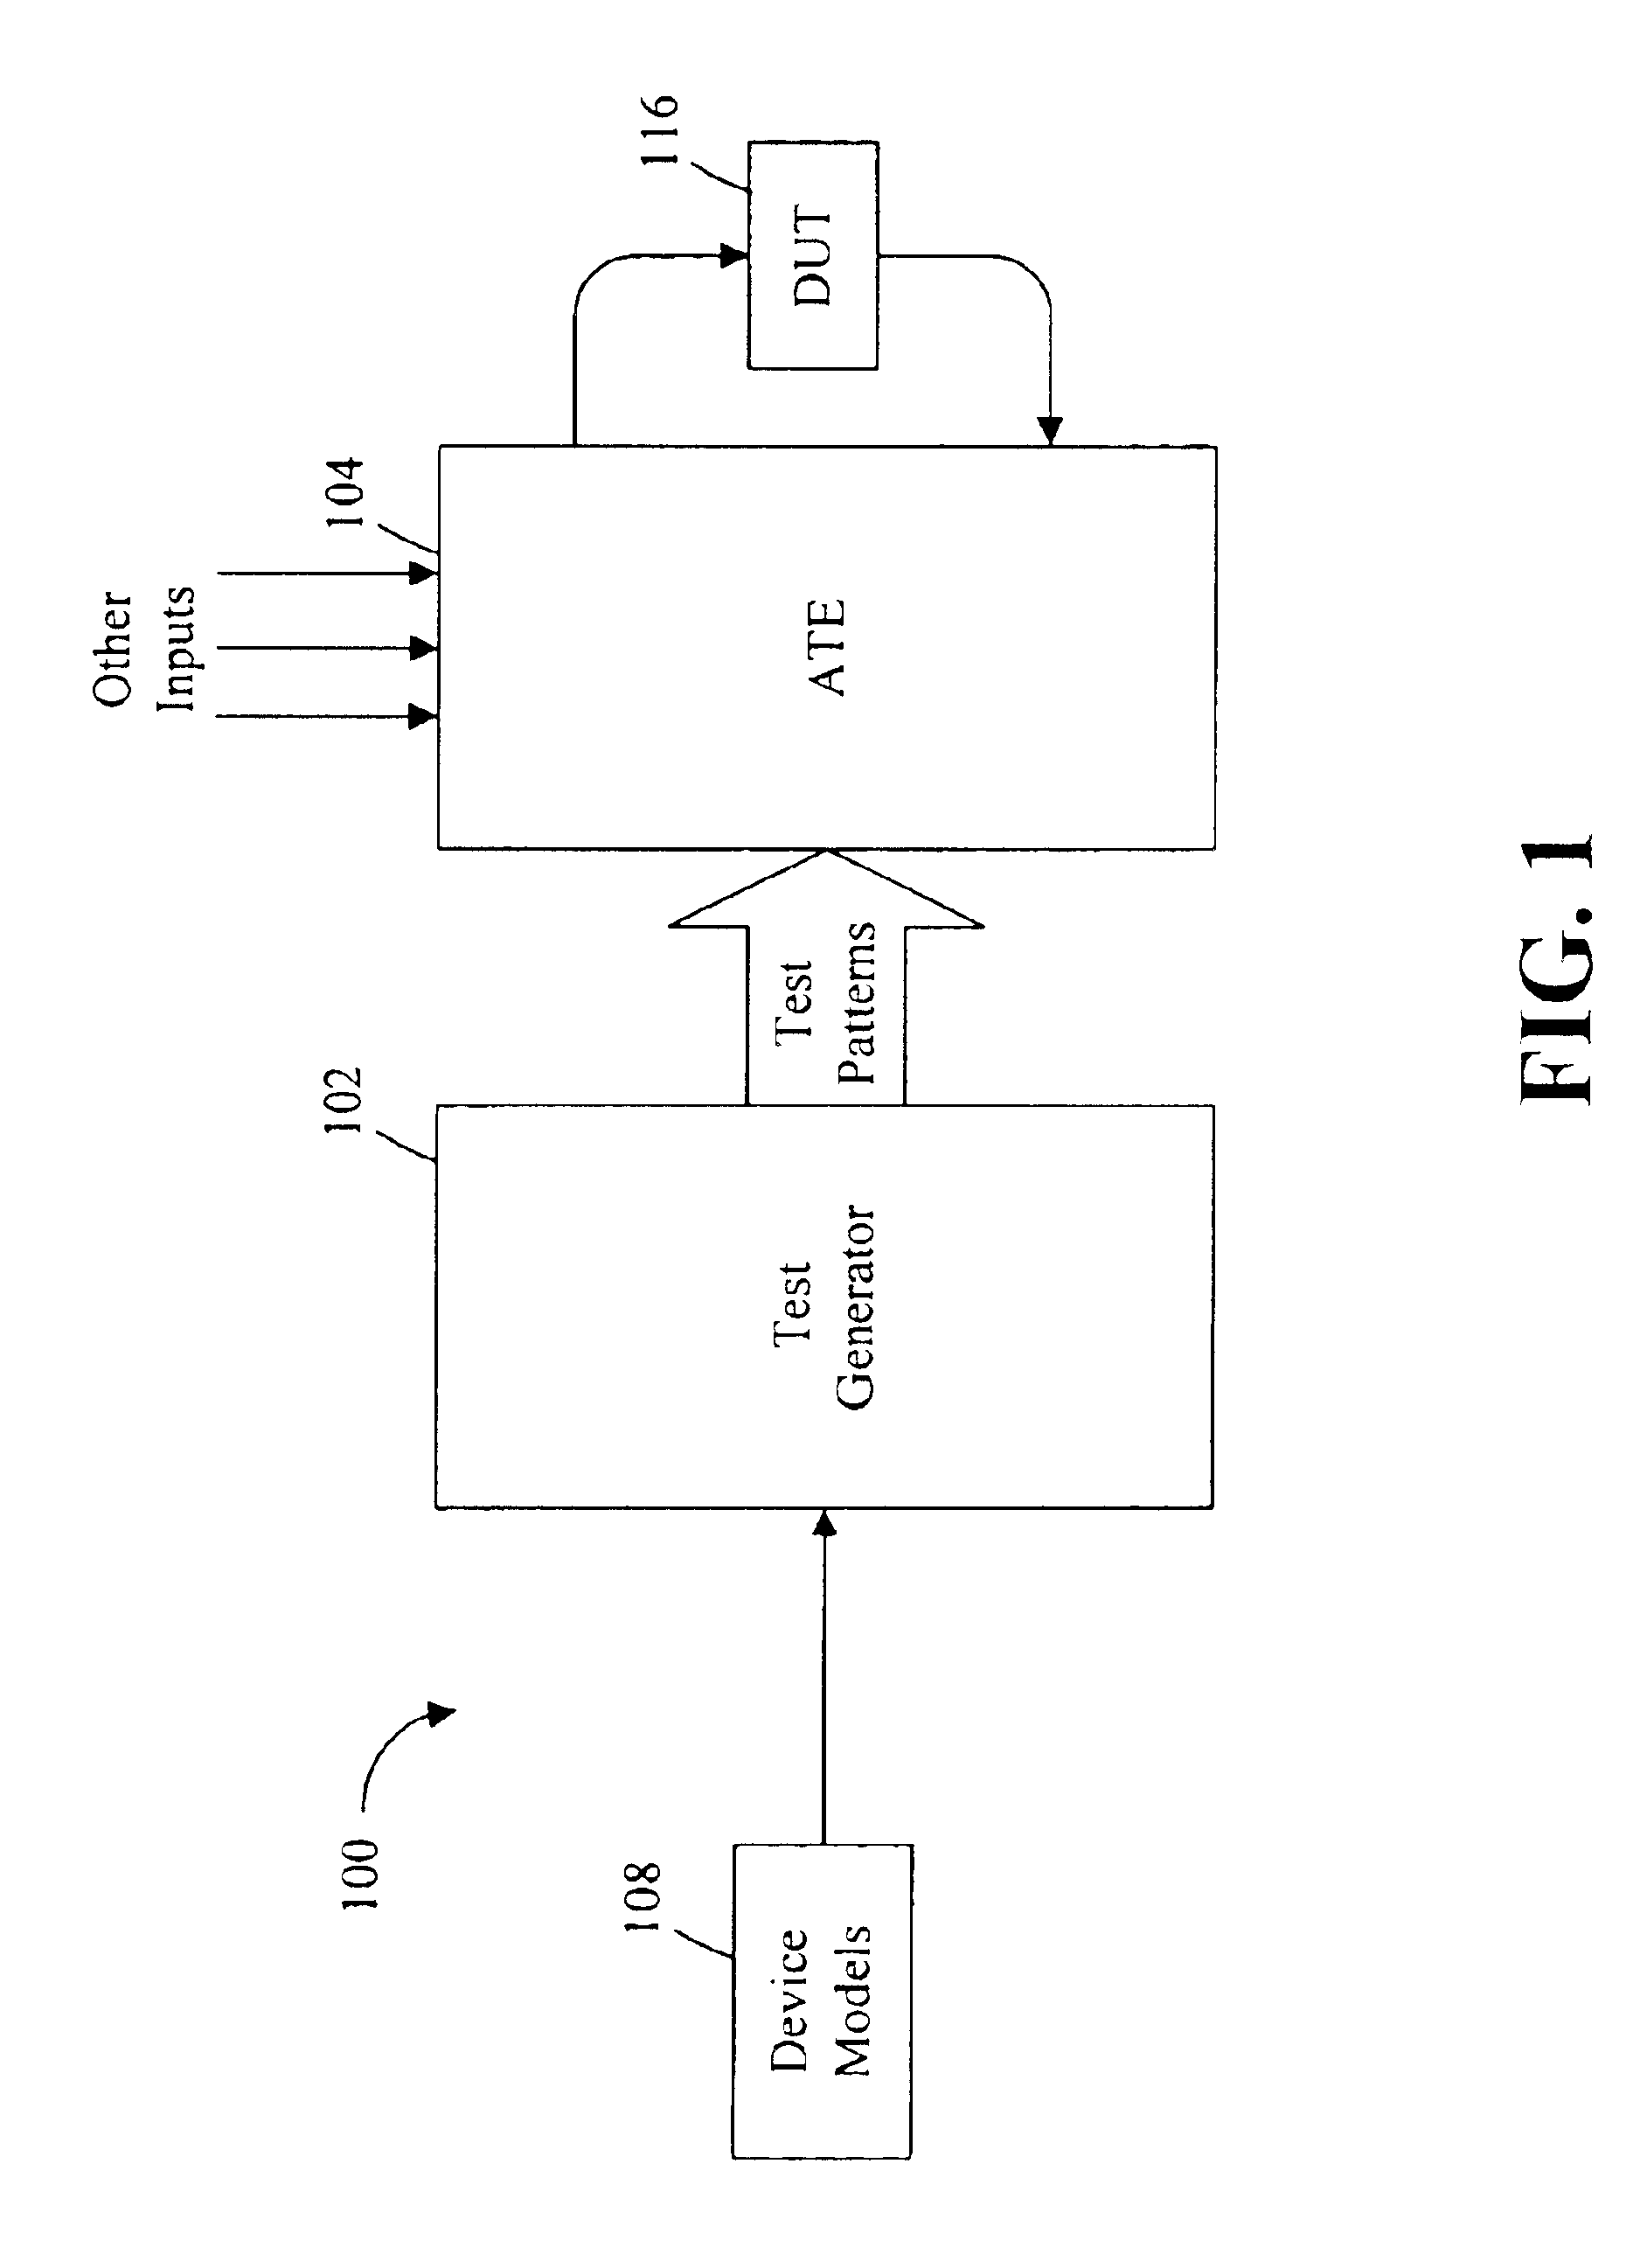 Apparatus and method for generating a set of test vectors using nonrandom filling